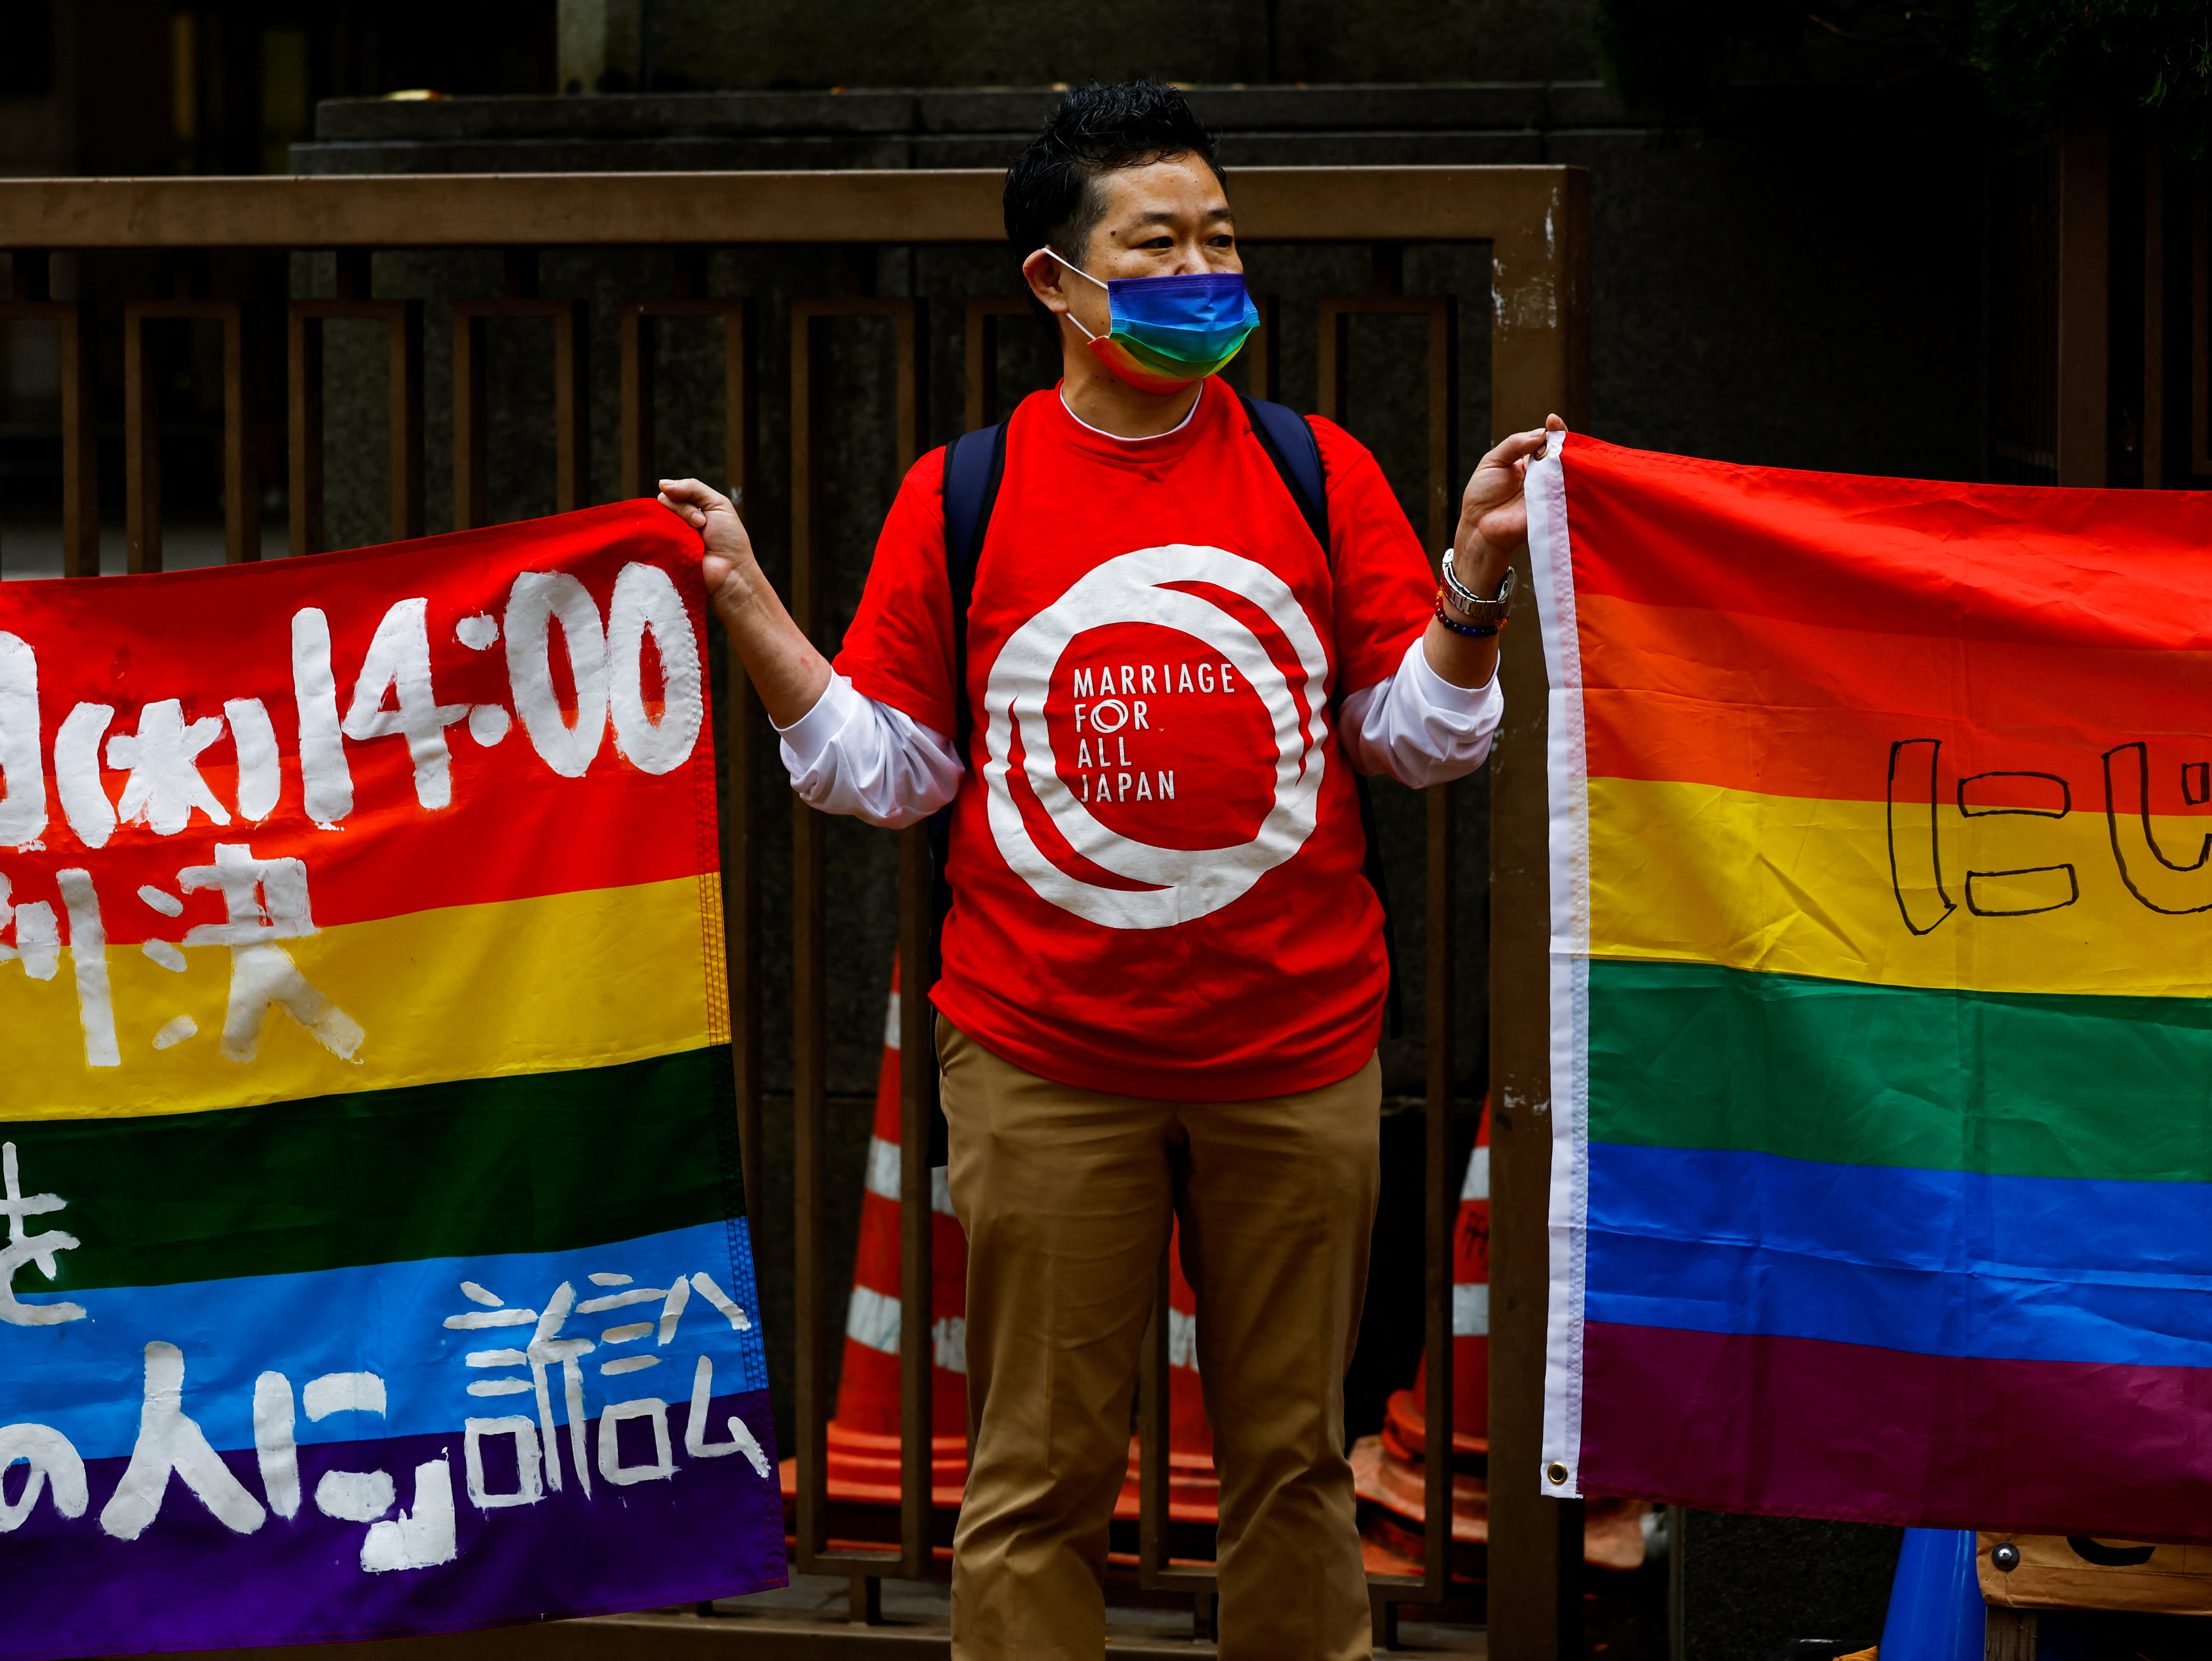 Bkpsex - Japan court upholds ban on same-sex marriage but voices rights concern |  Reuters